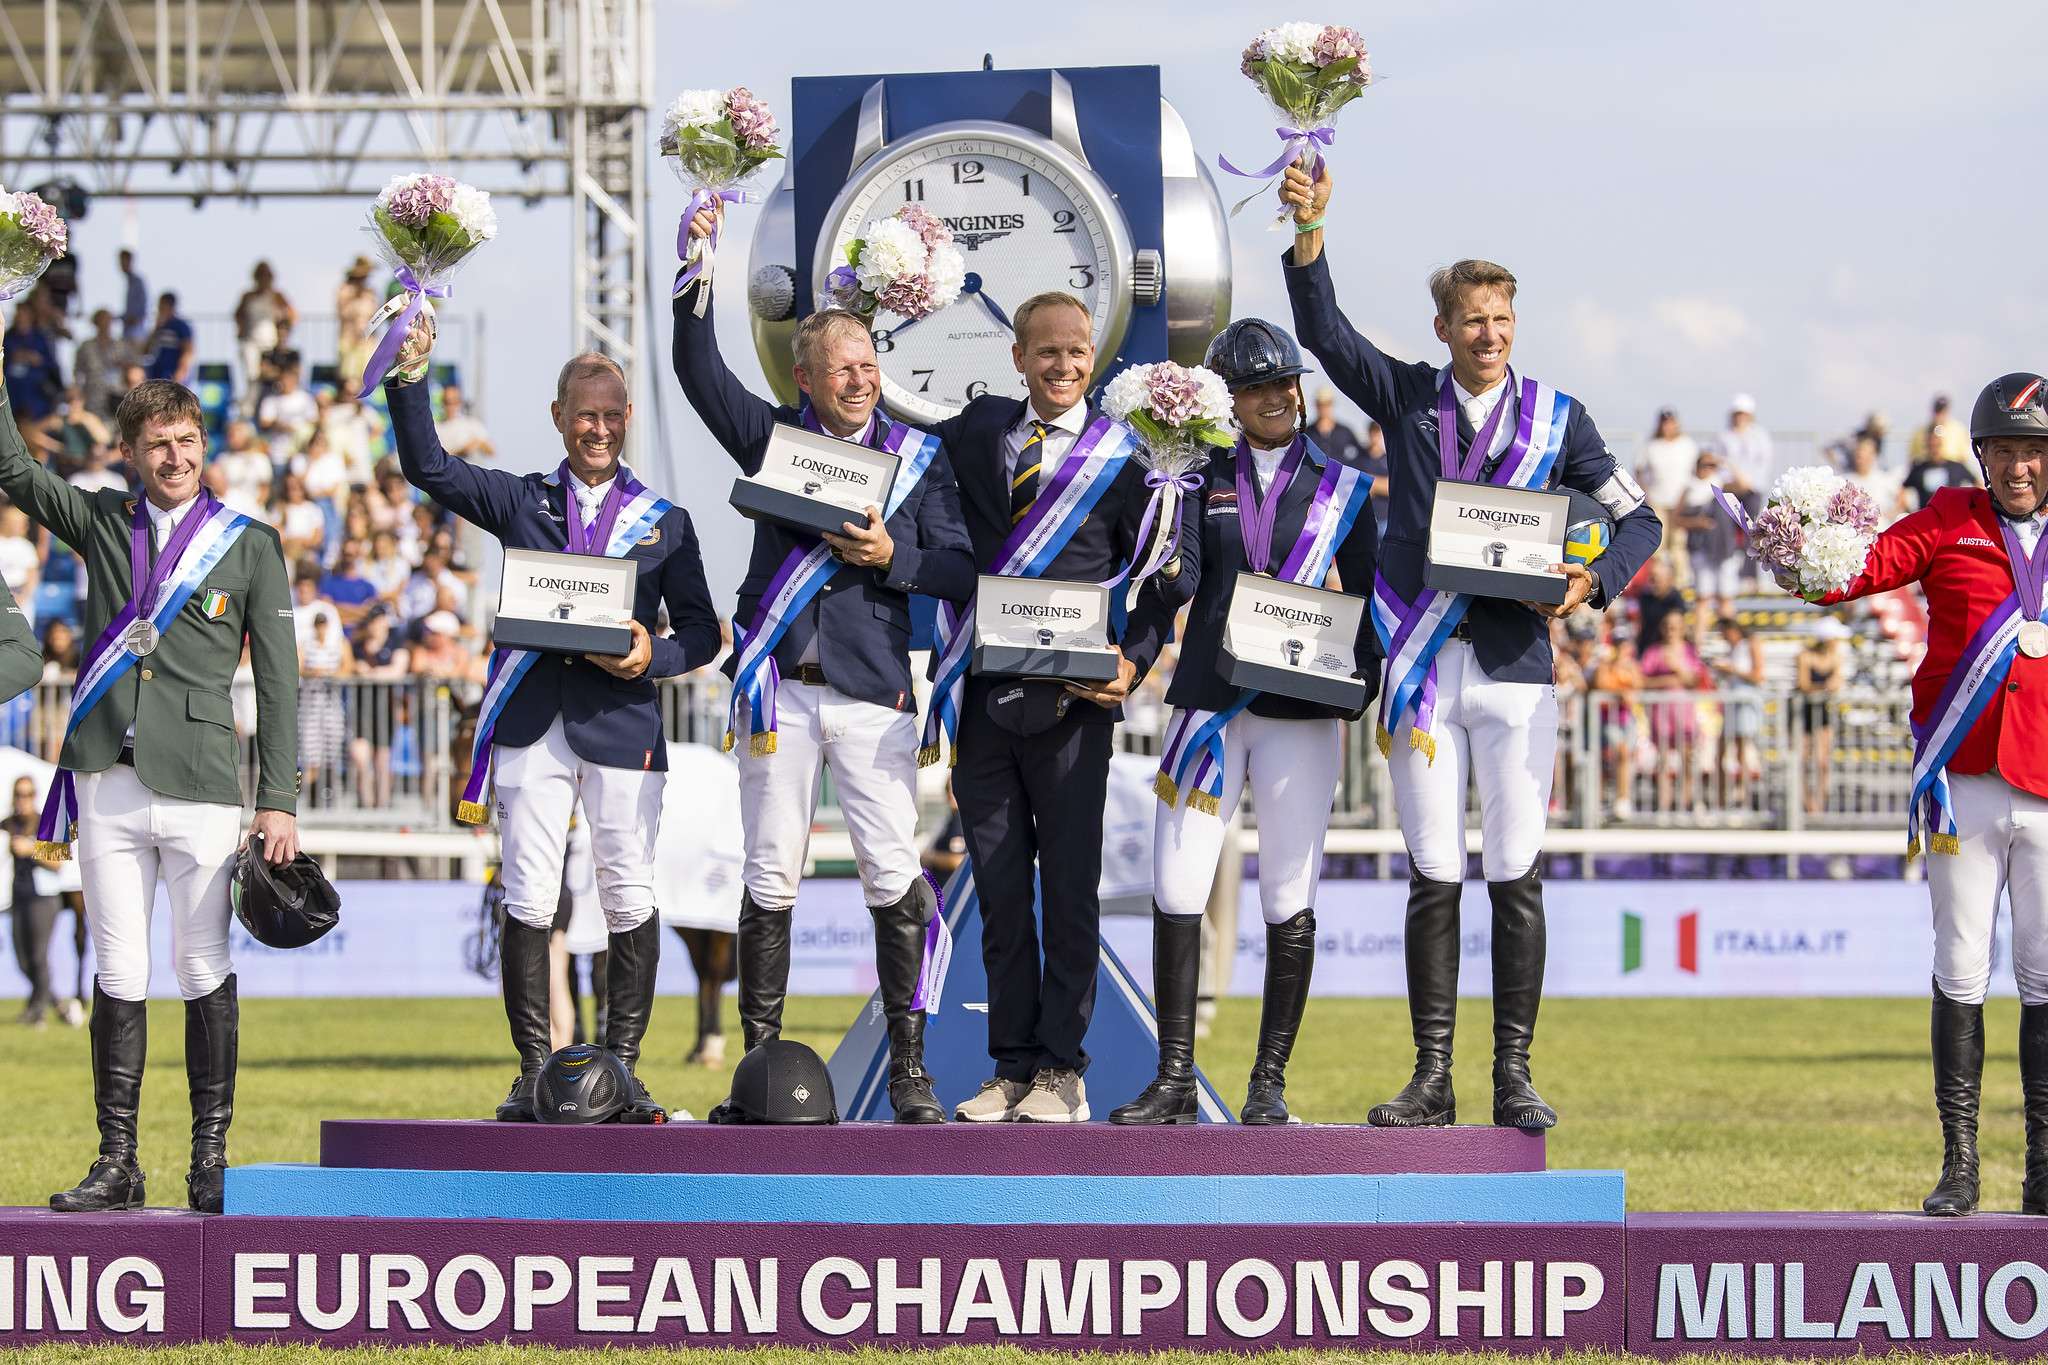 FEI Jumping European Championship: It’s golden glory for Team Sweden once again